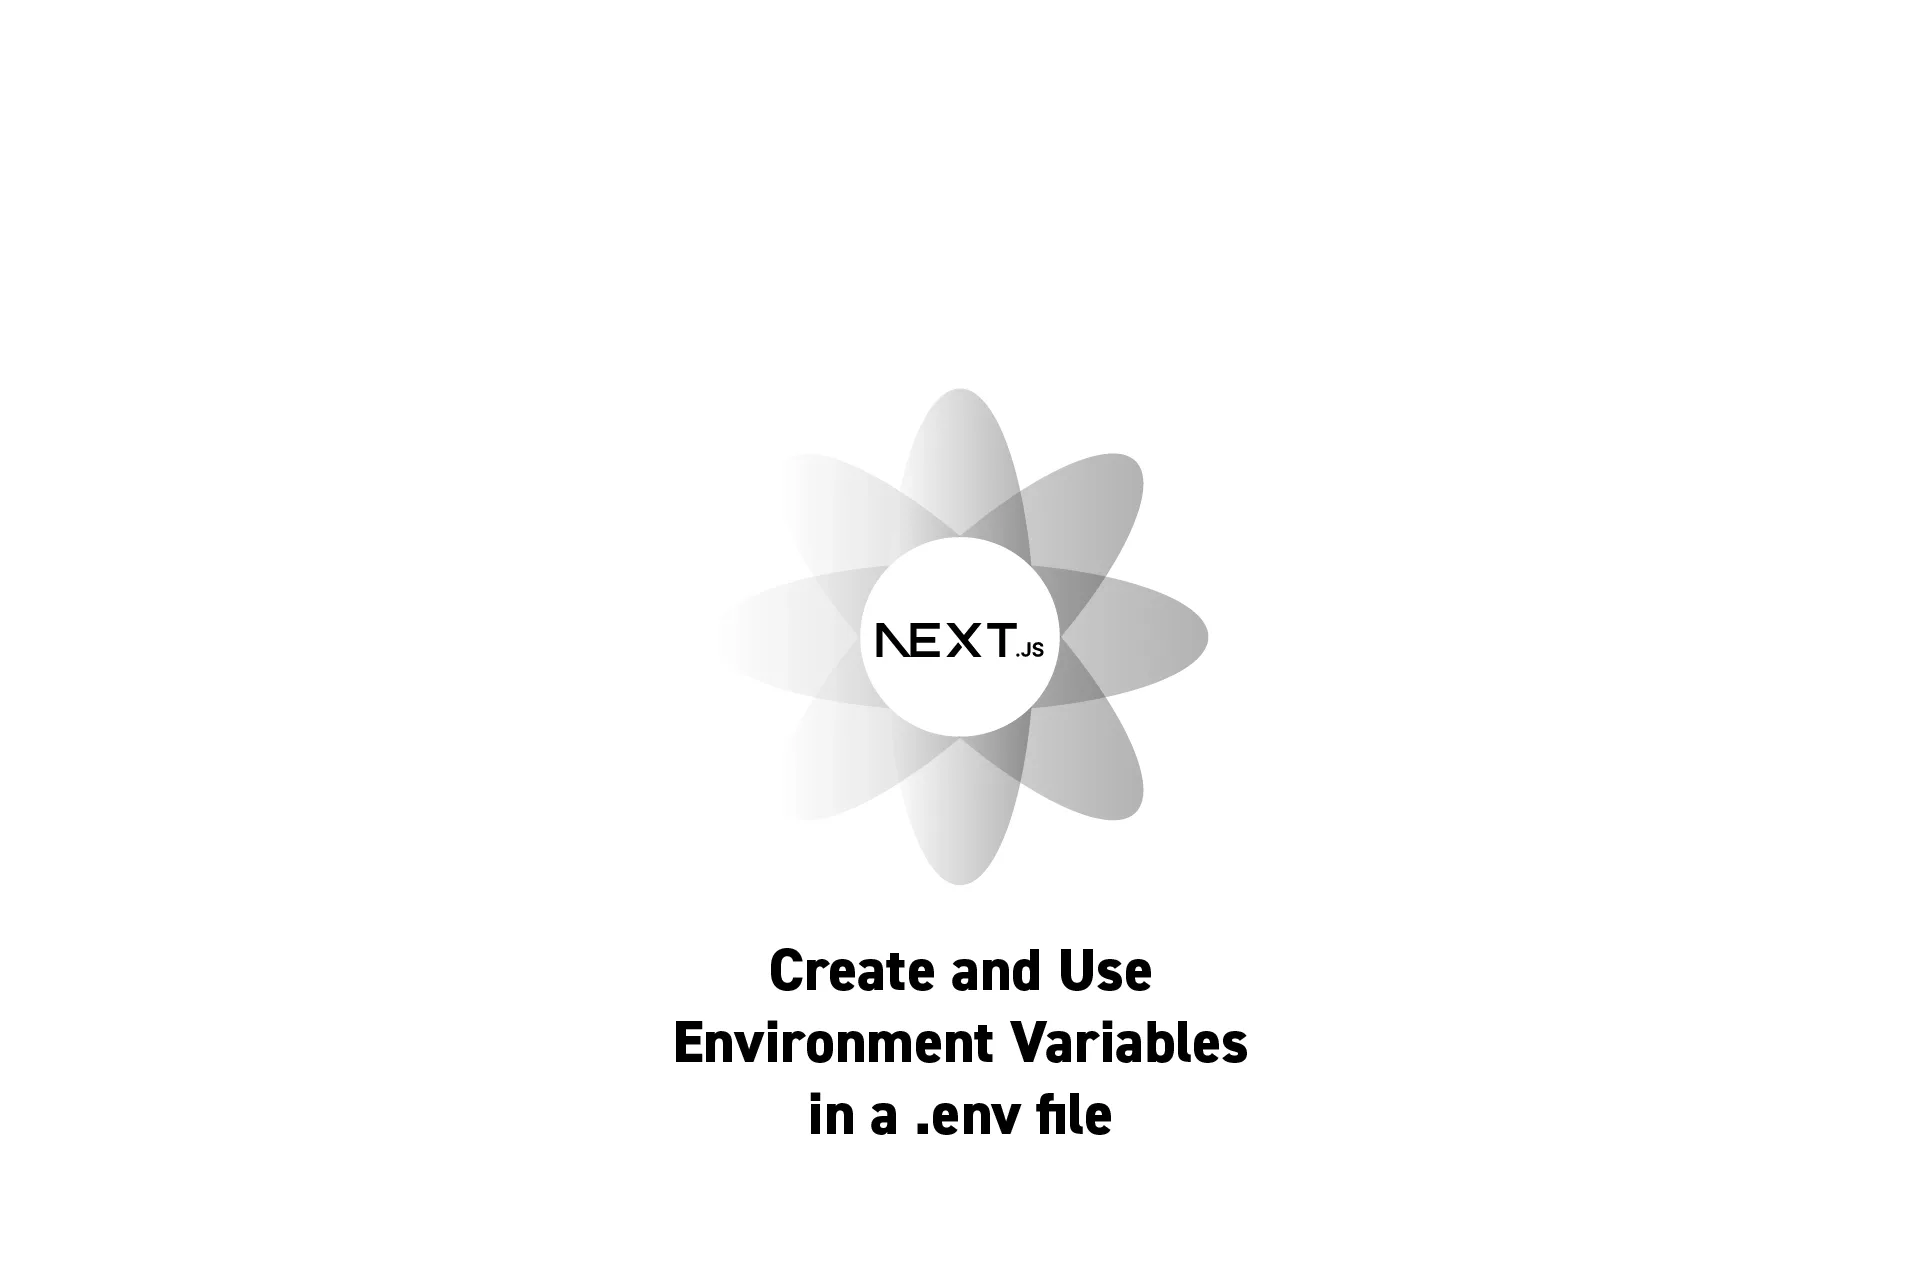 A flower that represents NextJS with the text "Create and Use Environment Variables in a .env file” beneath it.